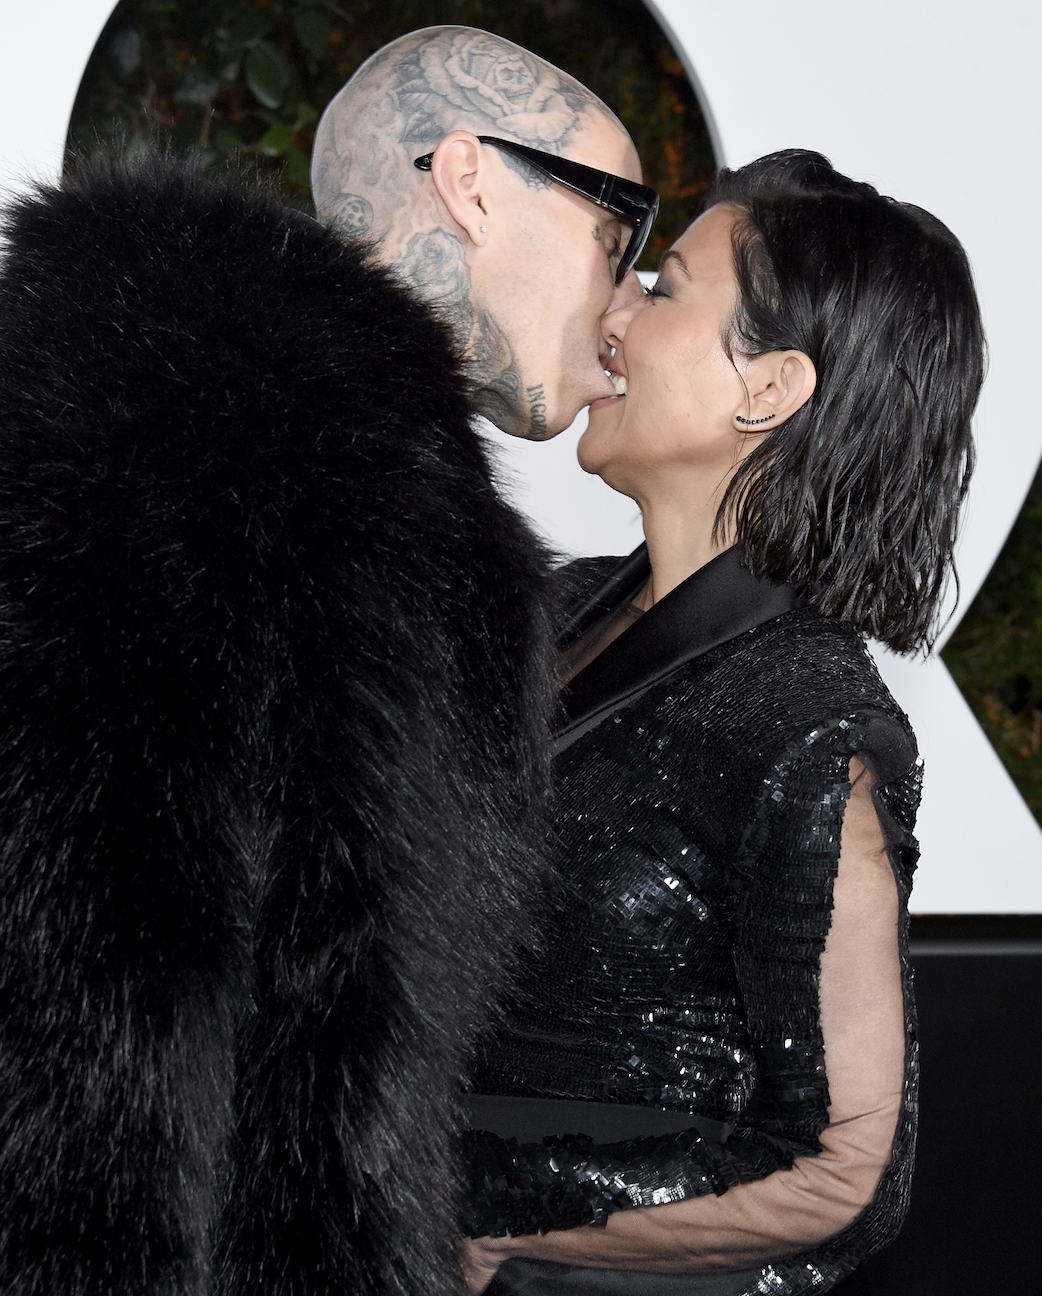 Kourtney playfully biting Travis&#x27;s bottom lip as they embrace each other at an event